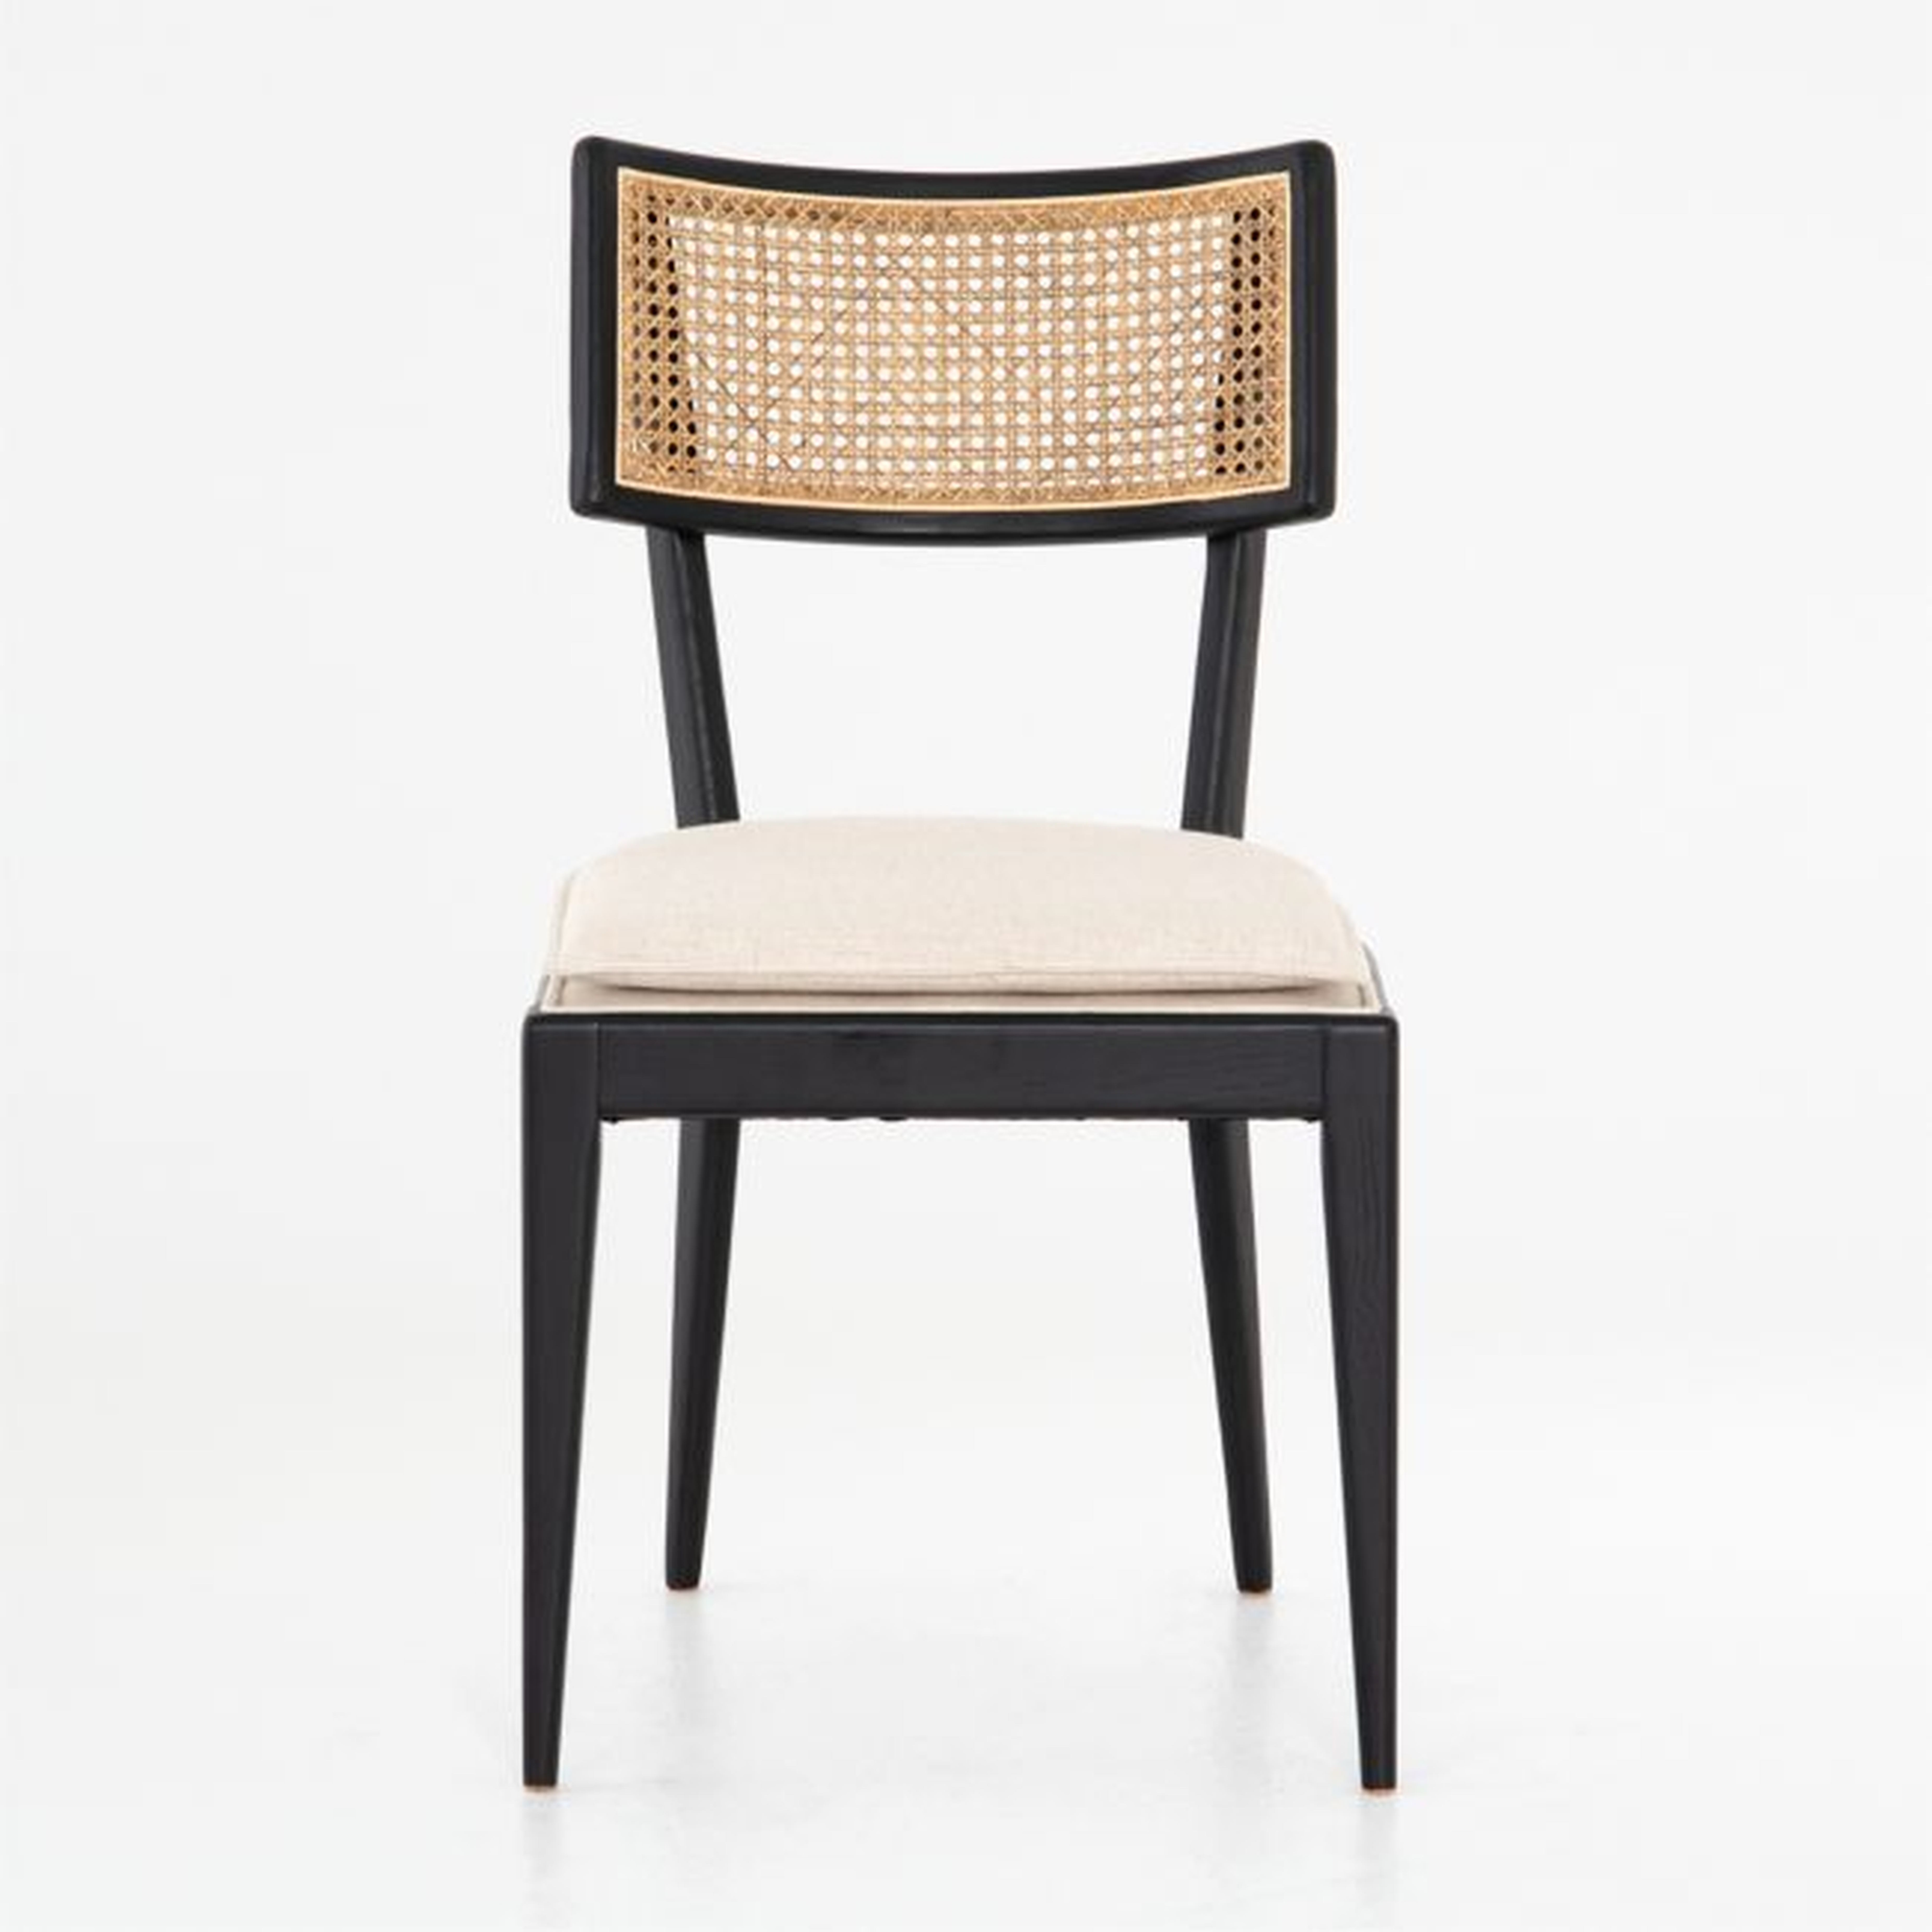 Libby Cane Dining Chair - Crate and Barrel